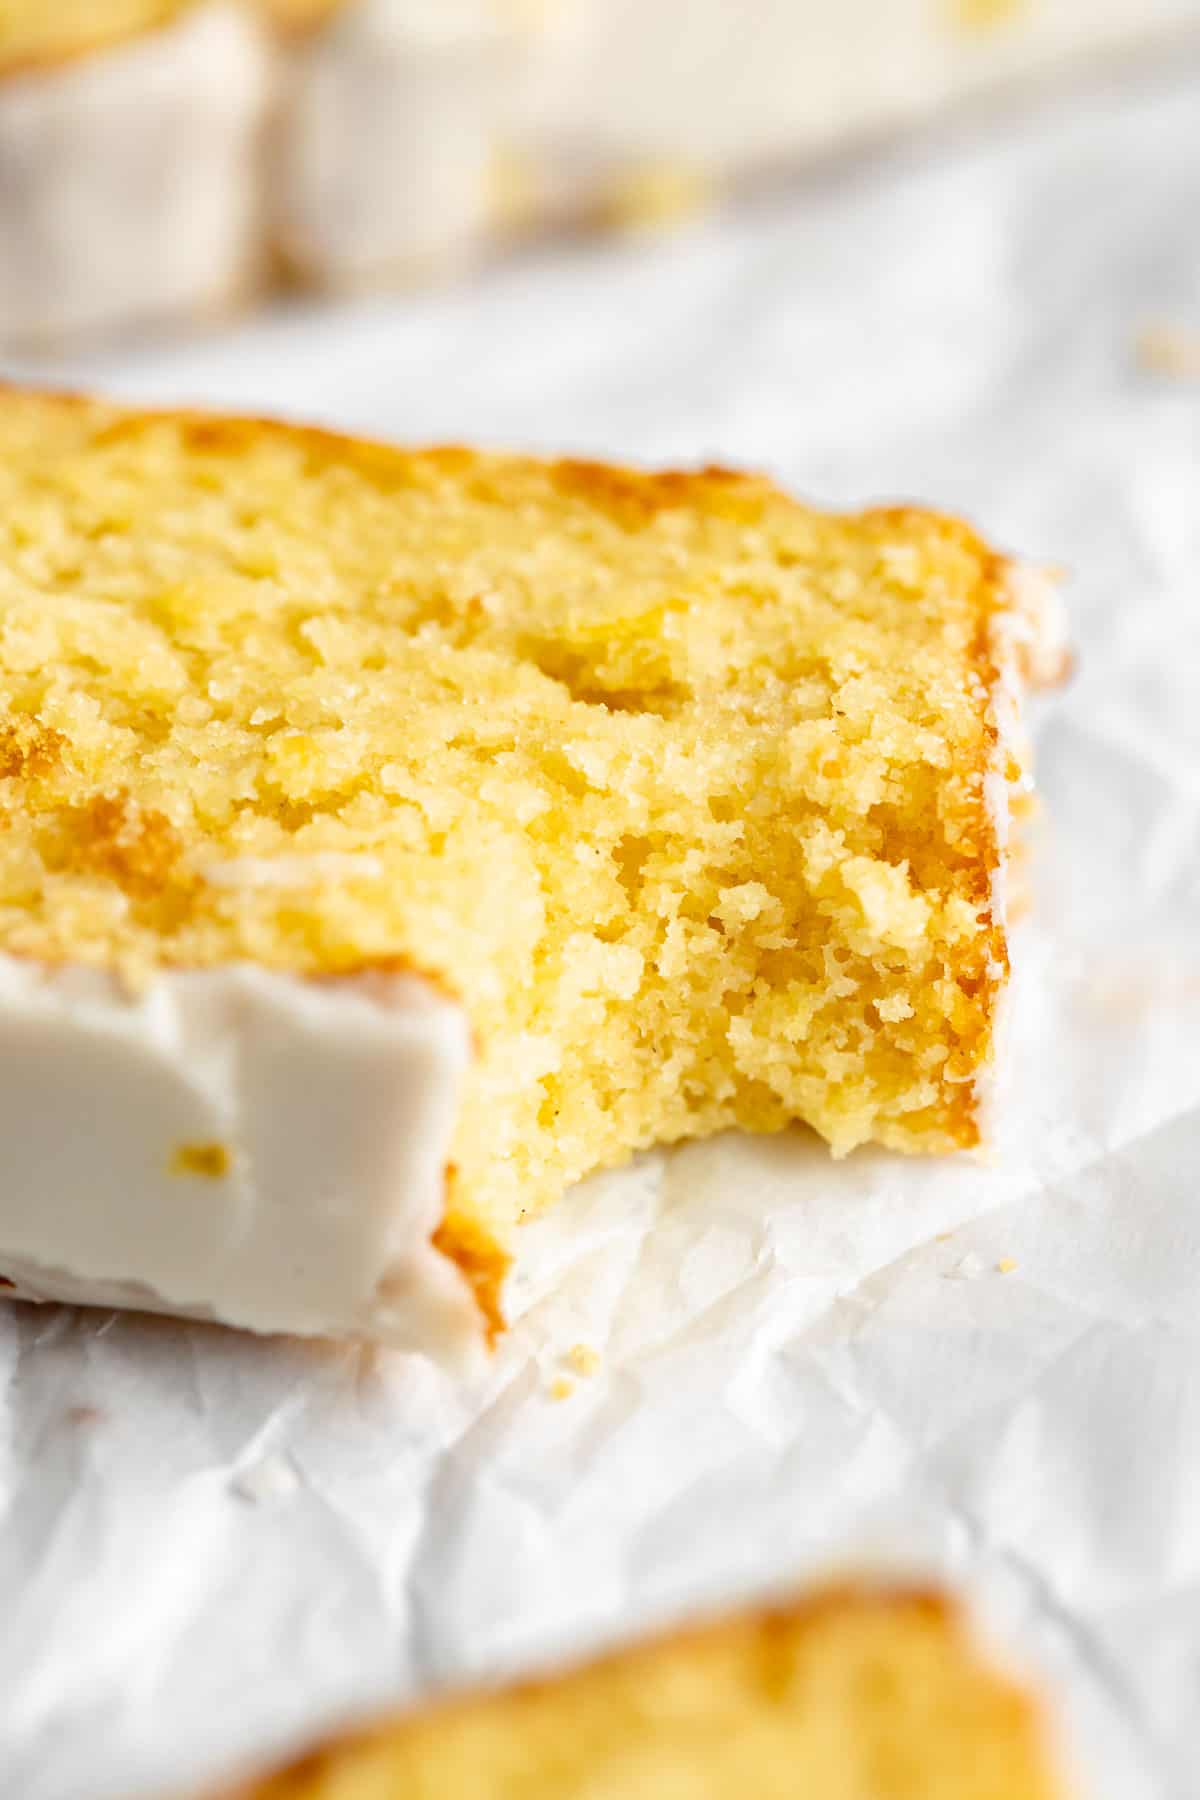 up close image of the lemon cake with a bite taken out to show texture